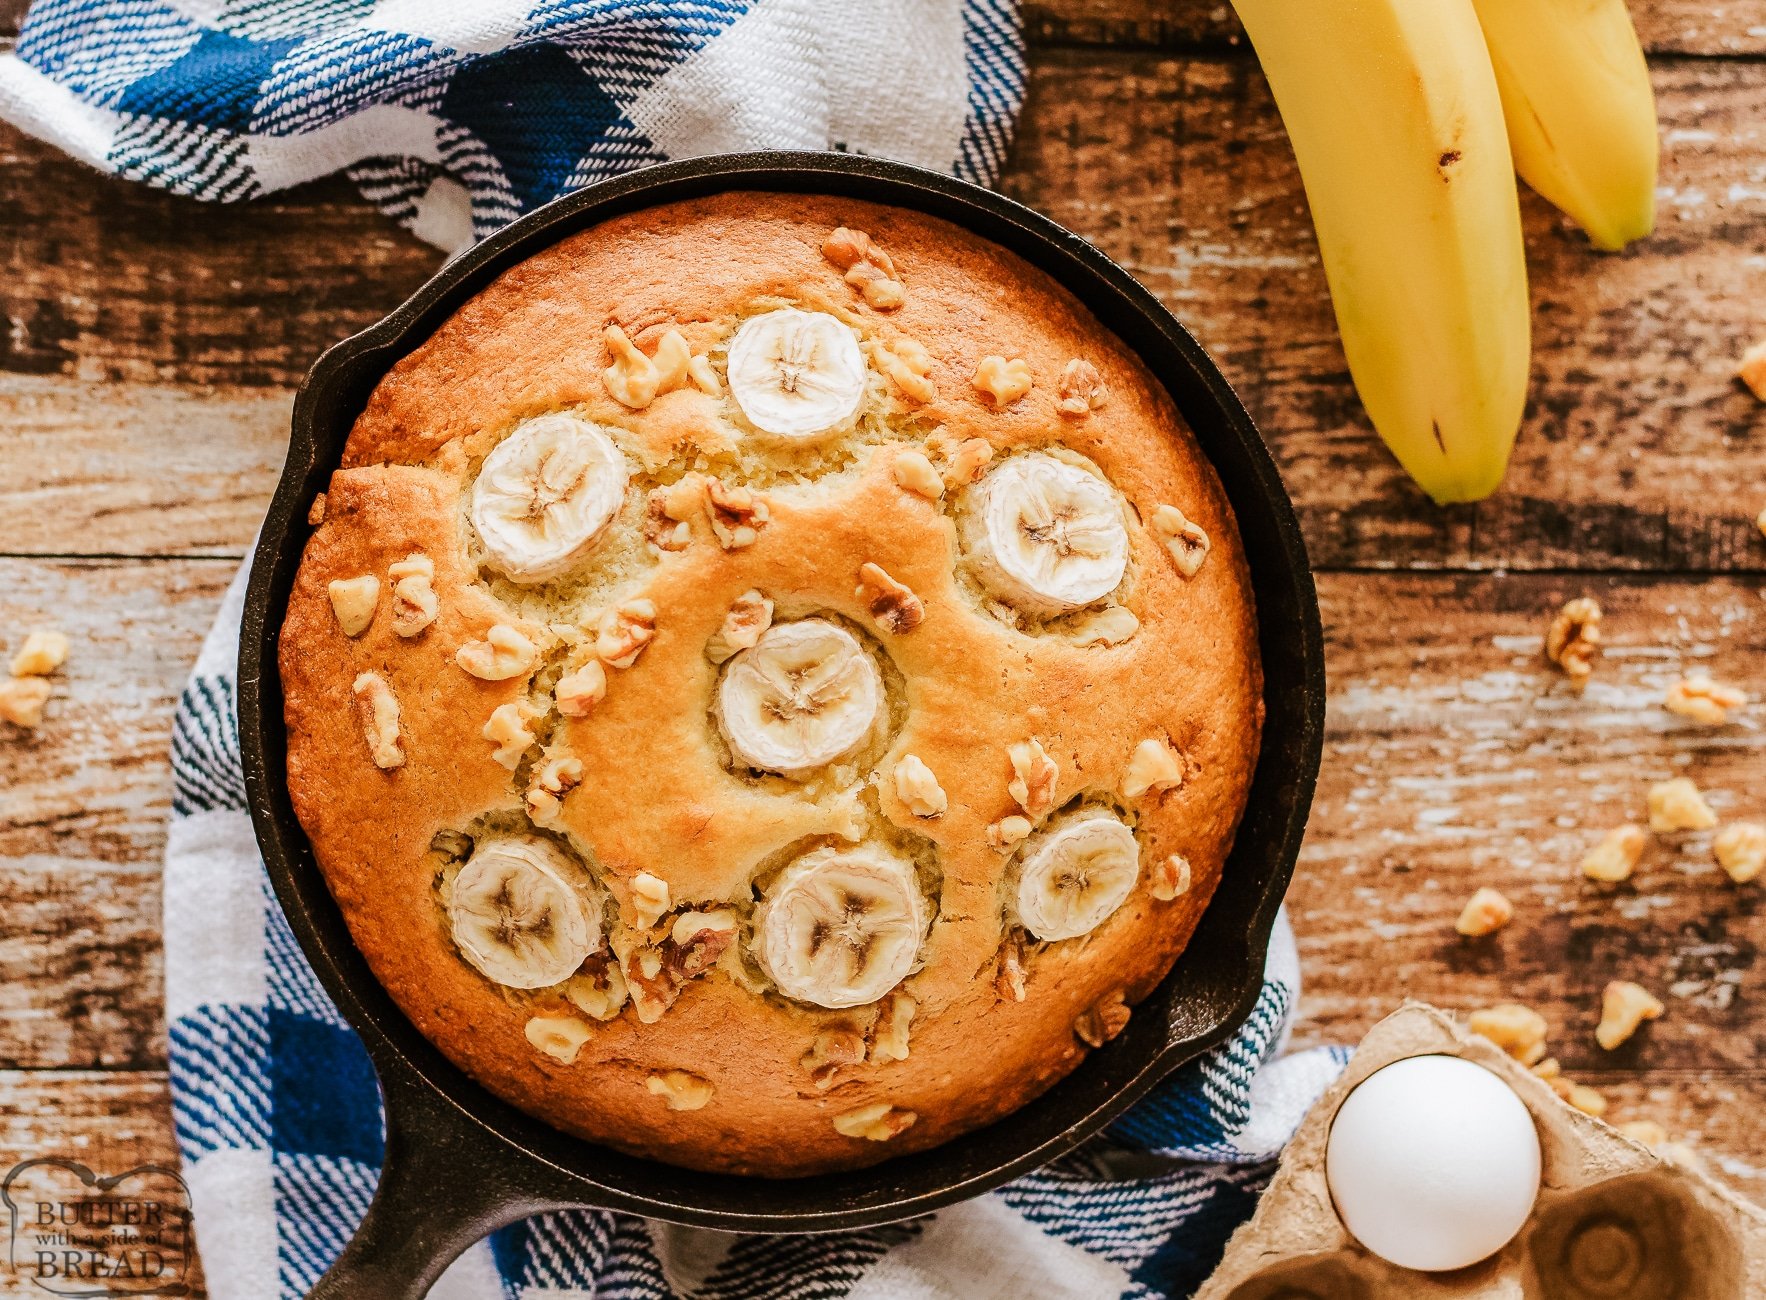 banana bread baked in a cast iron skillet